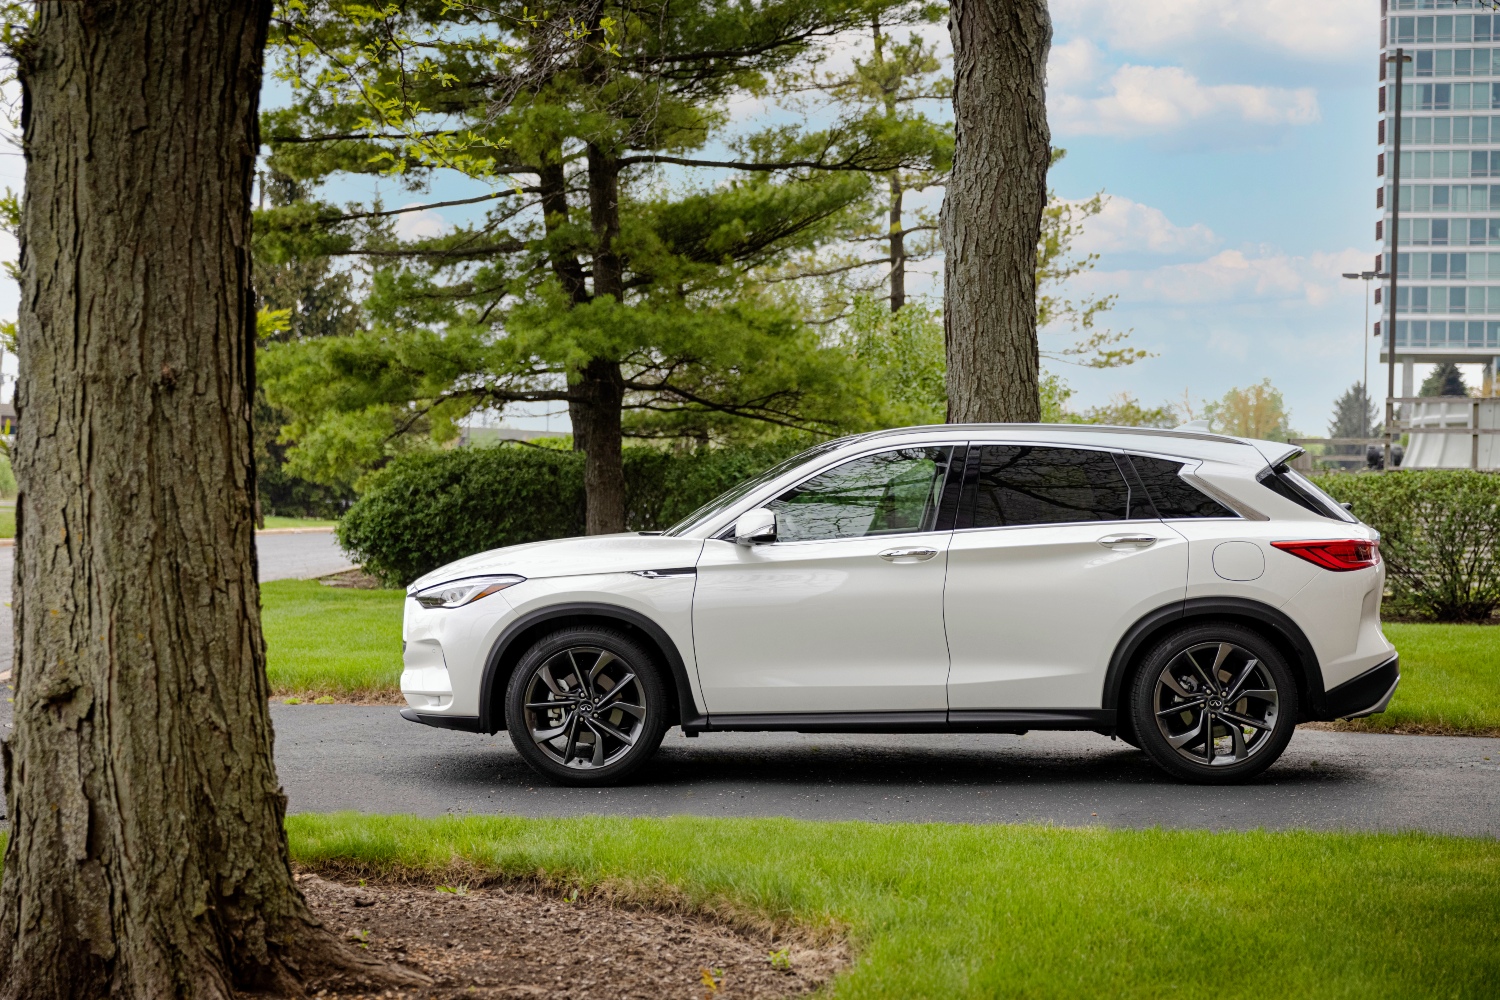 This Infiniti QX50 made this Consumer Reports least satisfying SUVs list